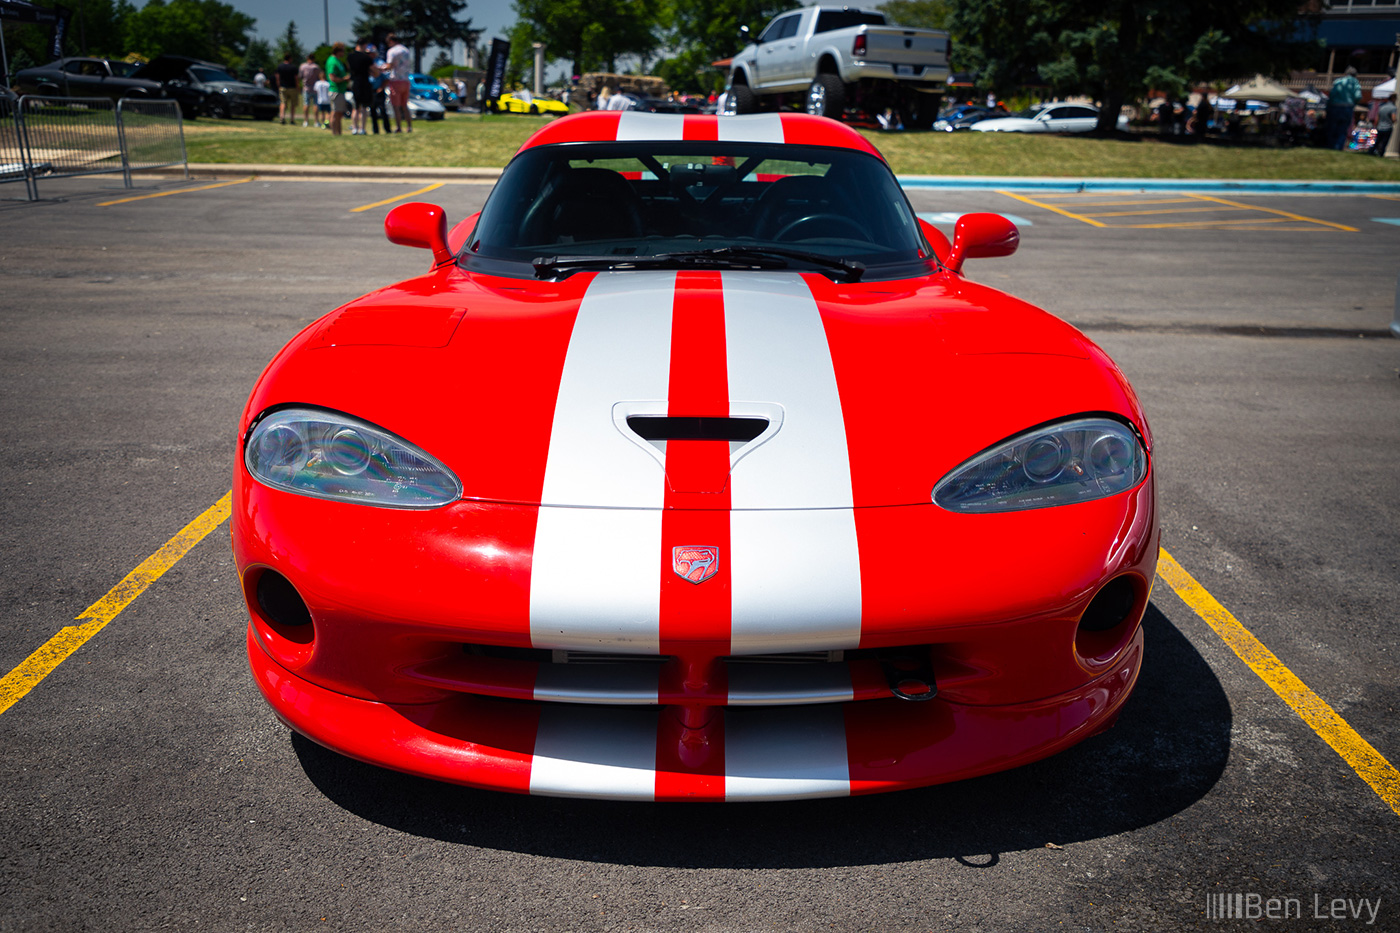 Red Dodge Viper with Silver Stripes